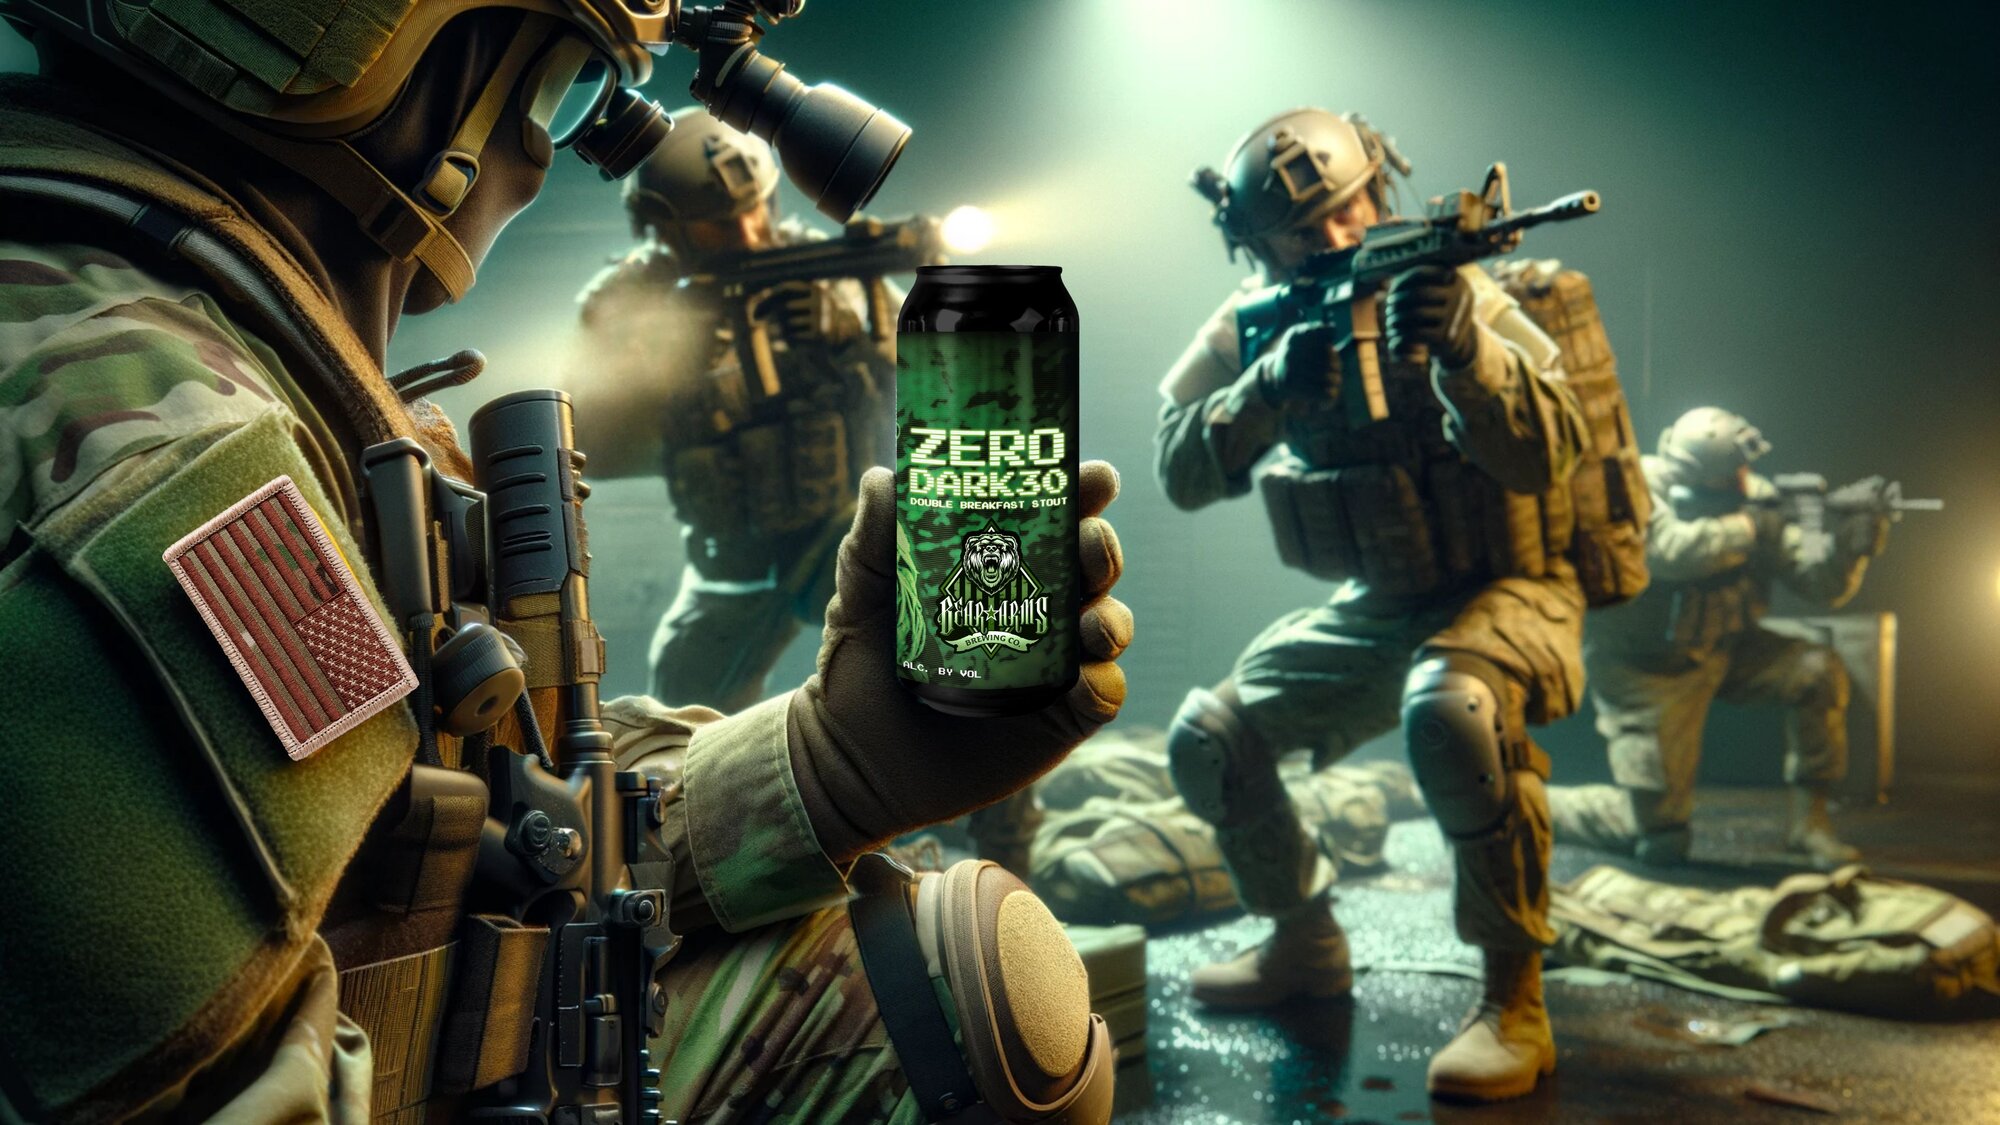 Soldiers in combat holding a Zero Dark 30 Double Breakfast Stout Can